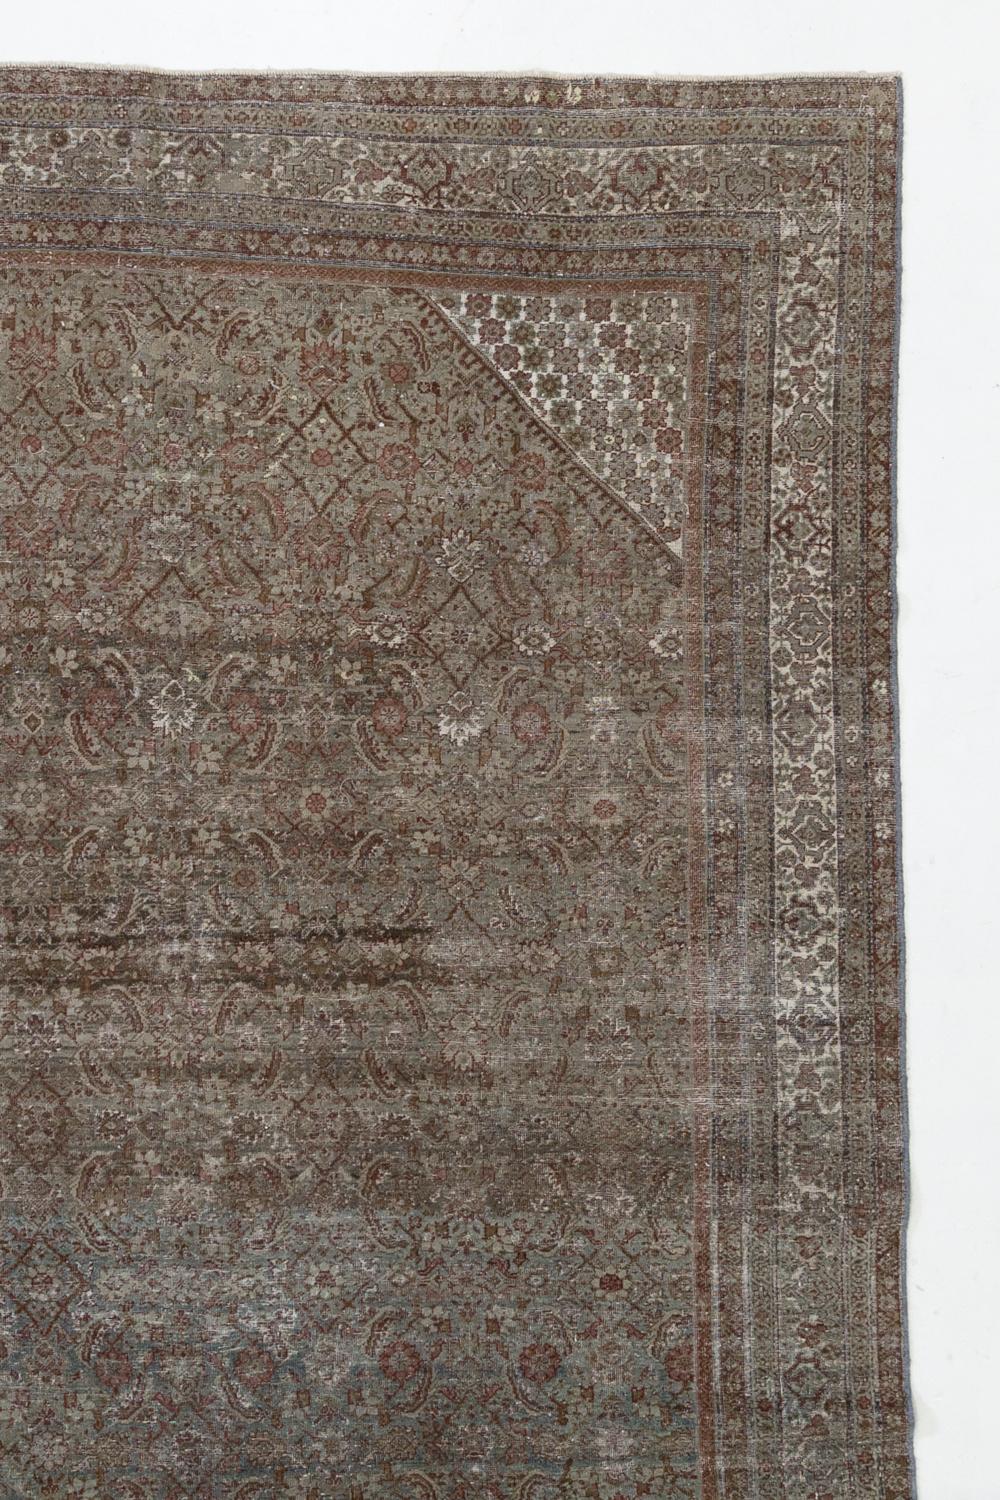 Antique Persian Malayer Rug In Good Condition For Sale In West Palm Beach, FL